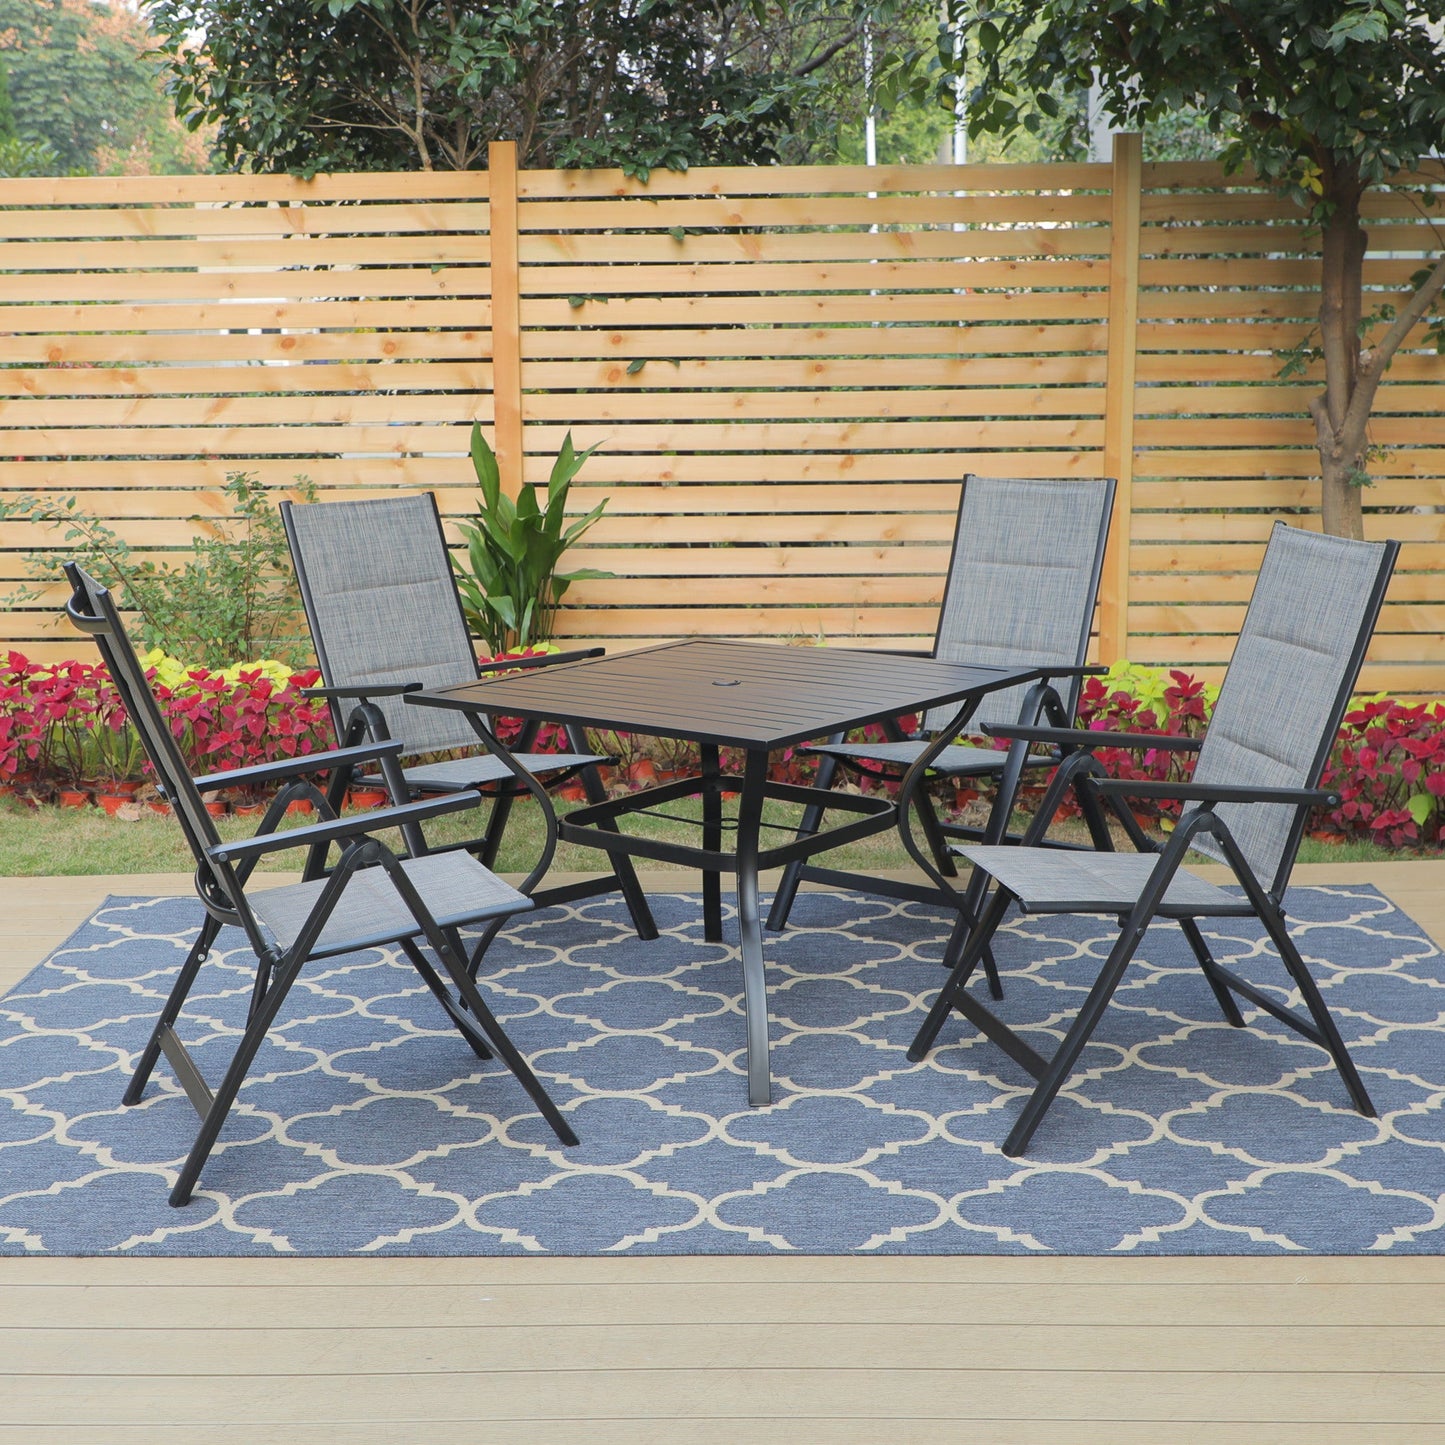 Sophia & William 5 Pieces Patio Dining Set Folding Chairs & Square Table